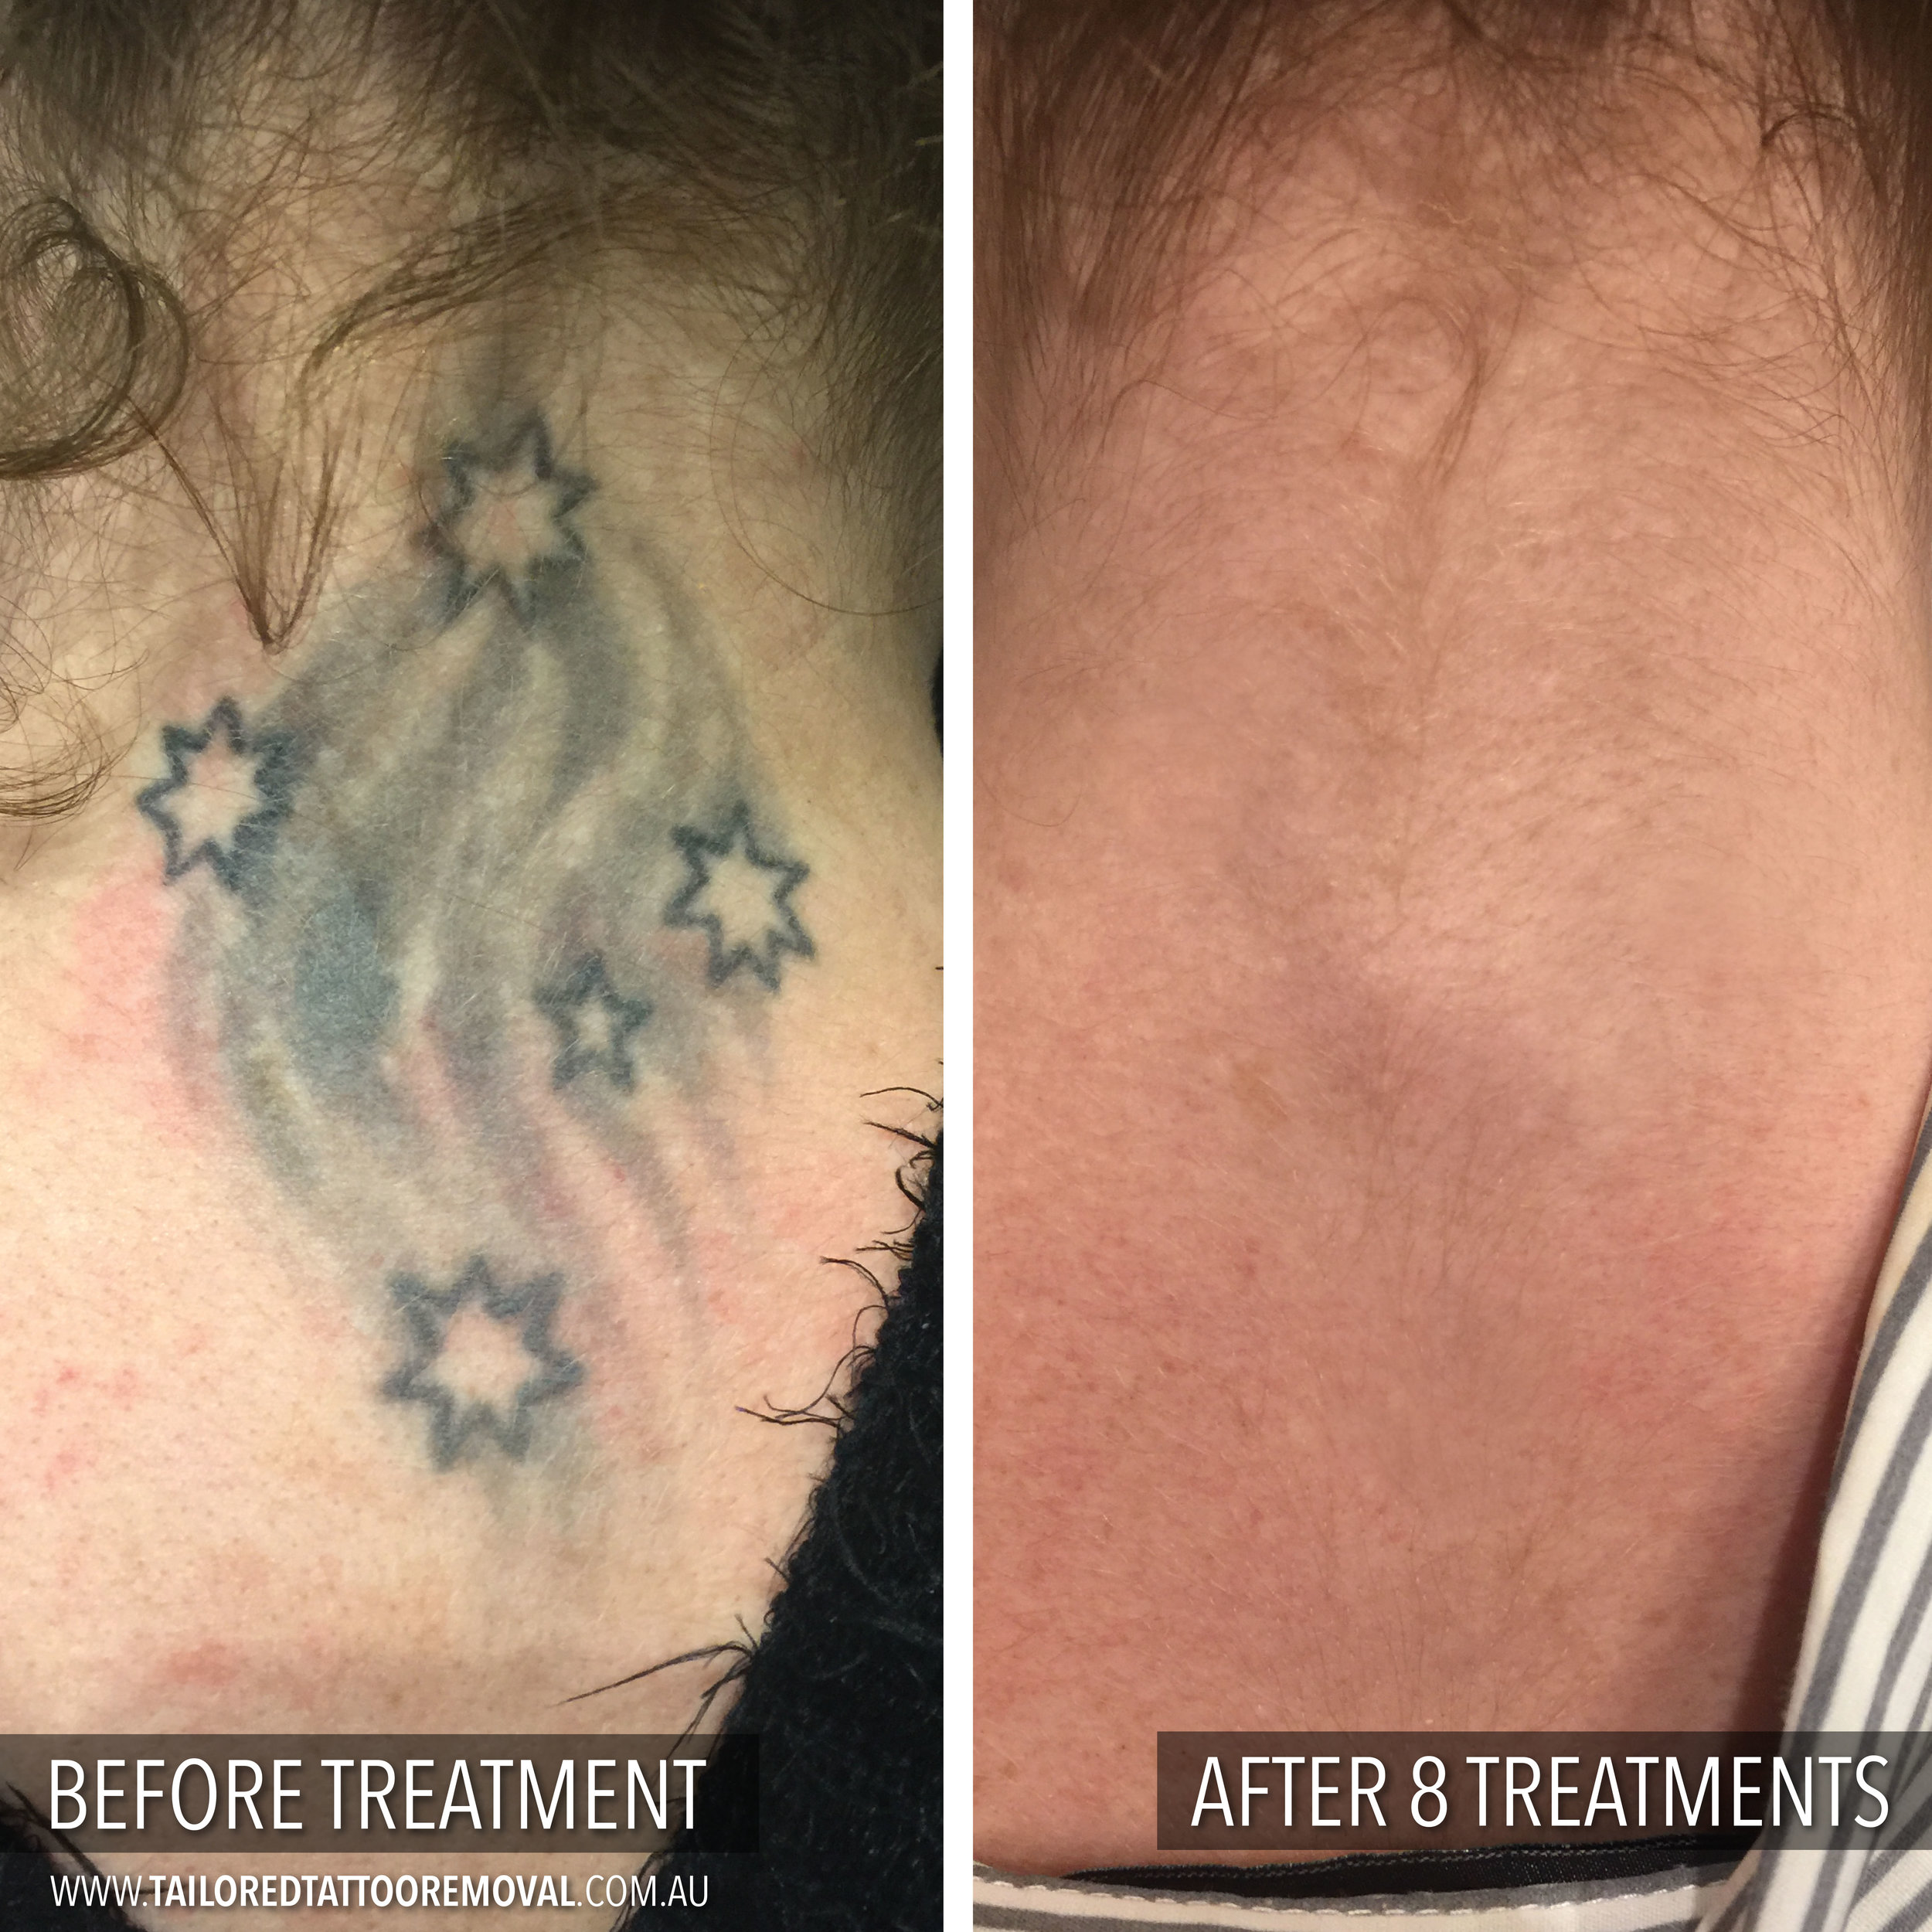 Laser Tattoo Removal: Outgrown your tattoo? We can help! - Skin Care Clinic  Melbourne, Skin Clinic Lilydale | Main Street Cosmetic